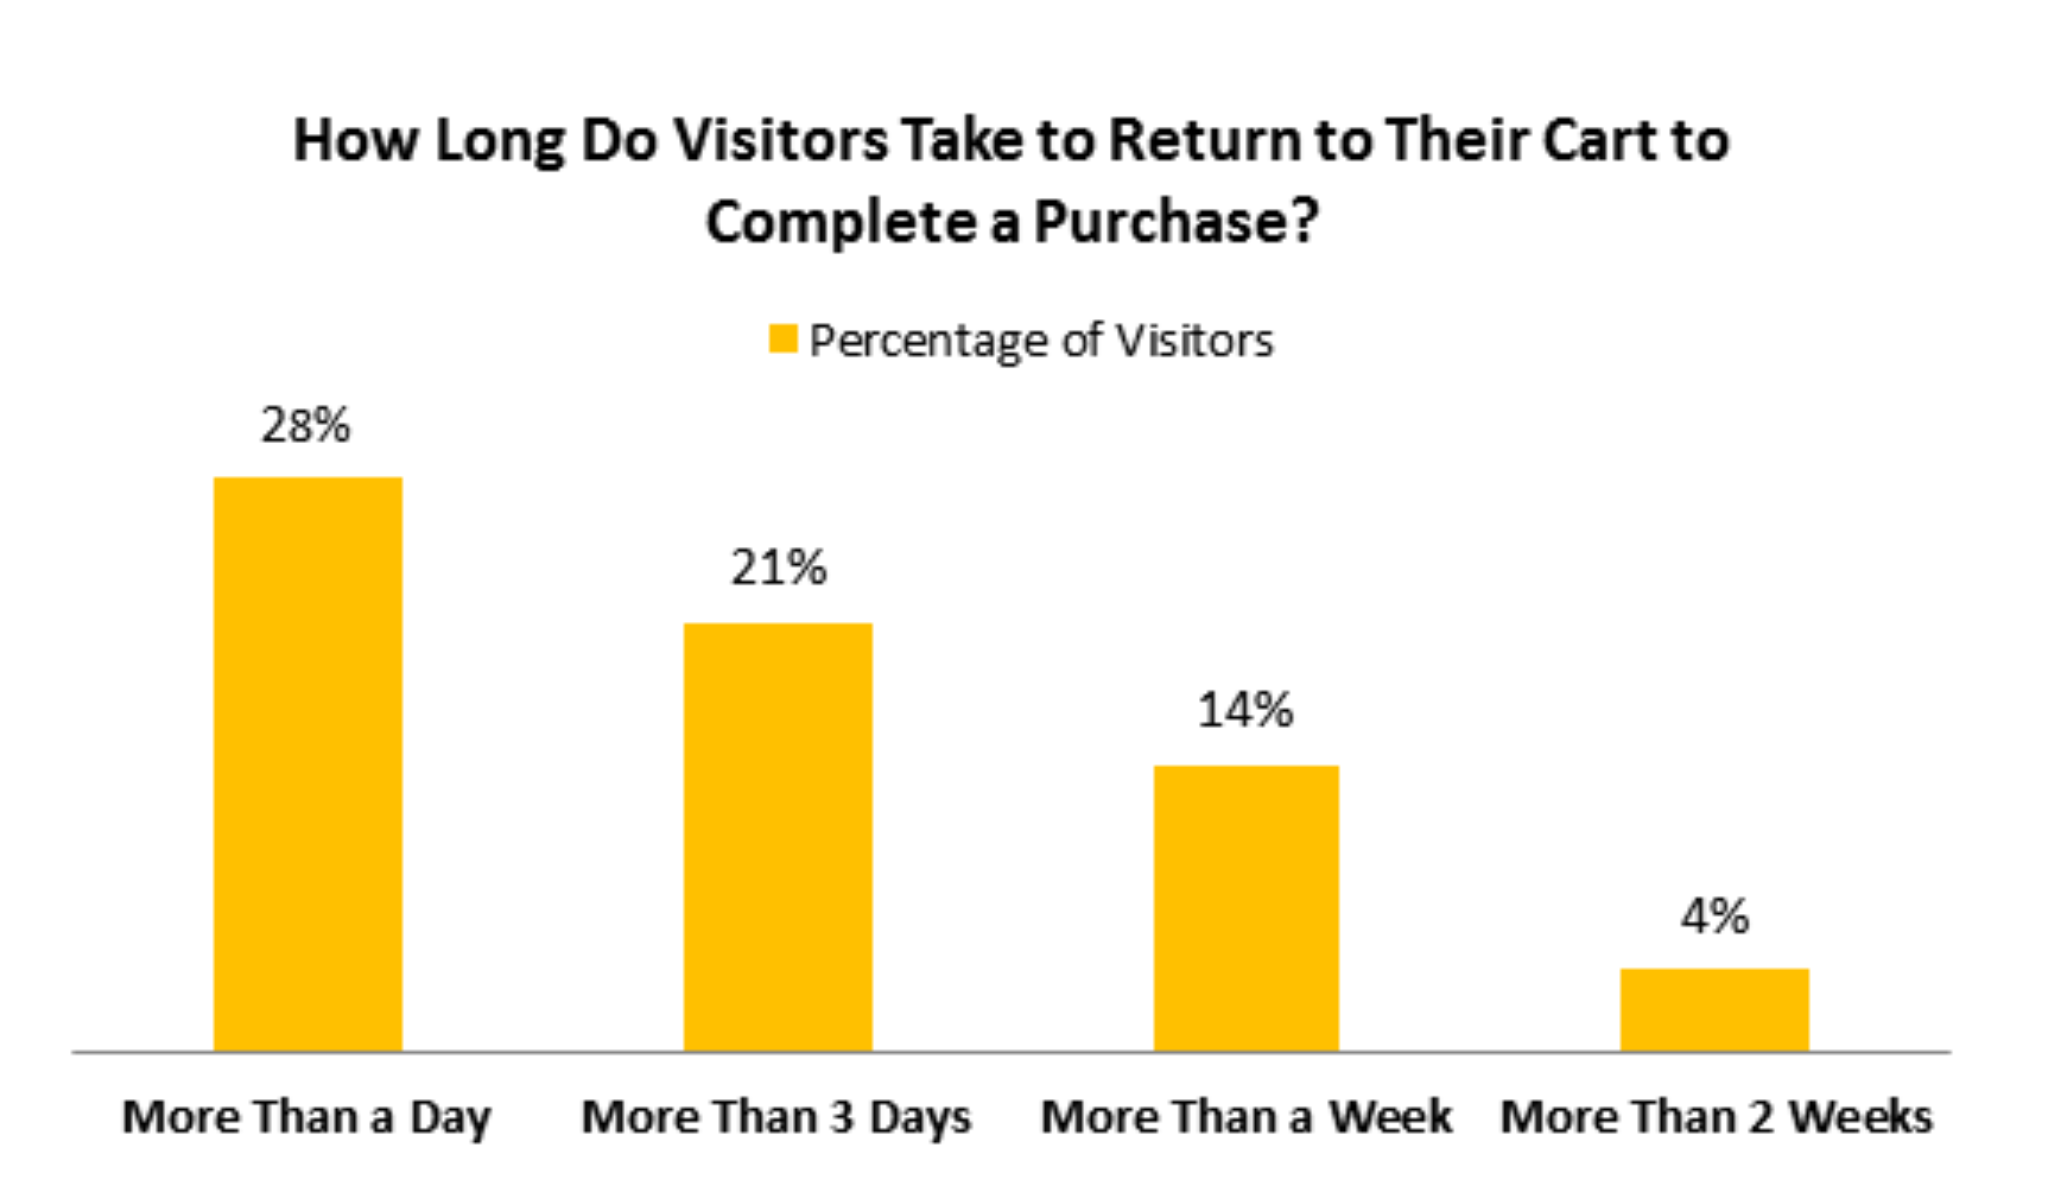 Graph showing how long it takes visitors to return to their cart to complete a purchase.